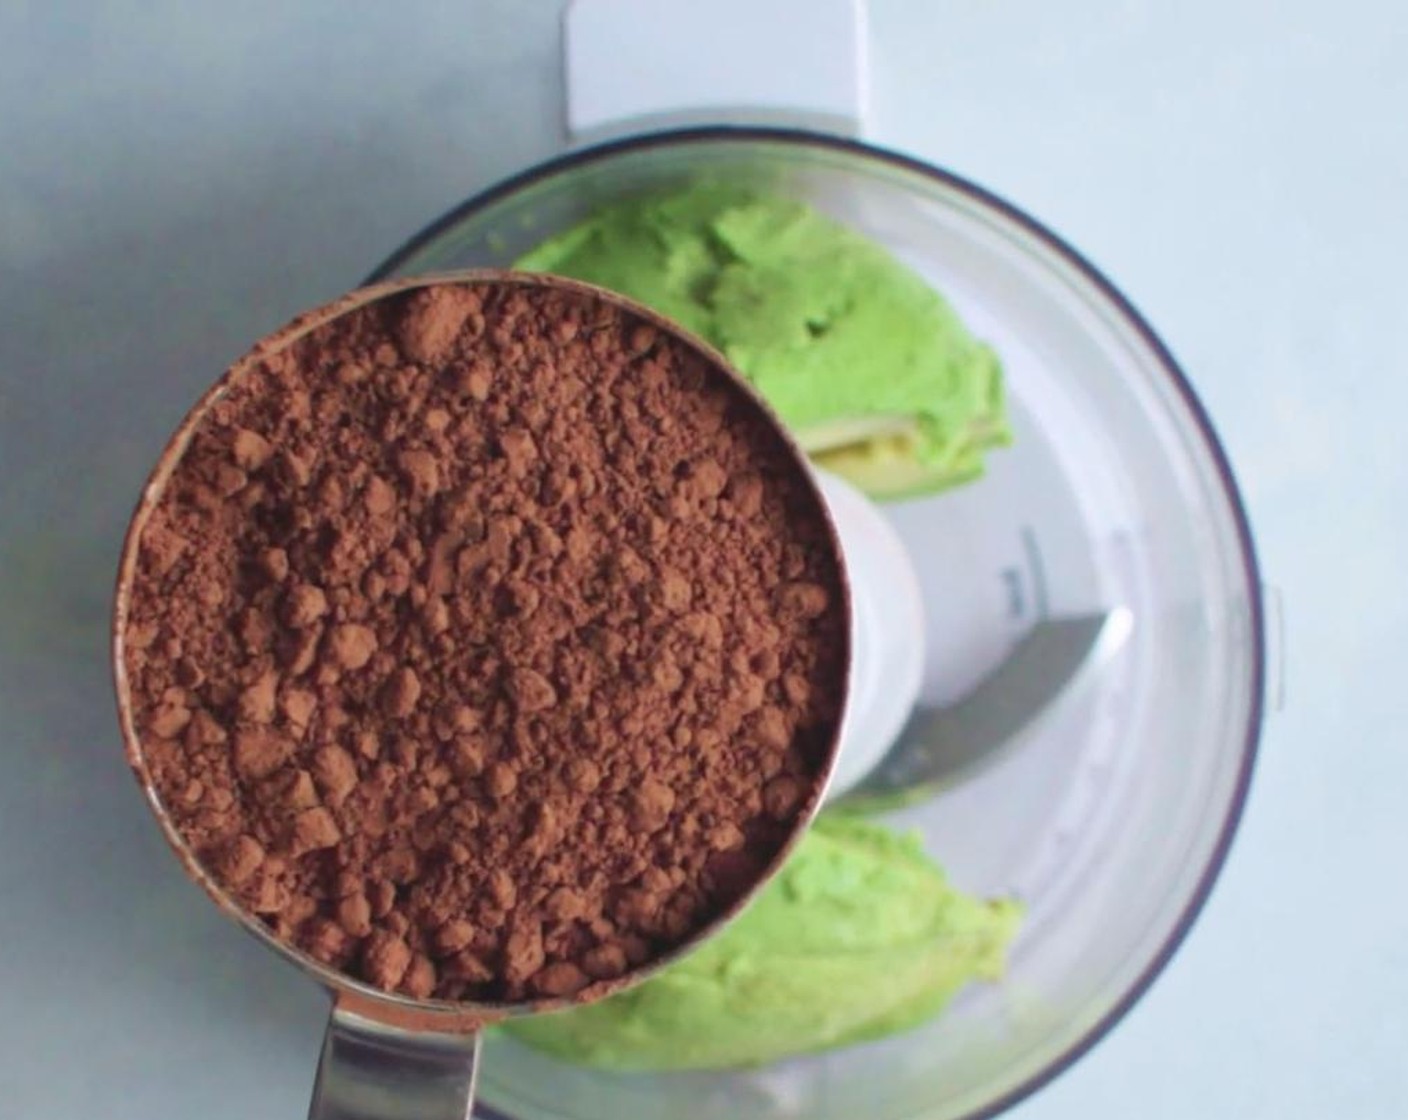 step 1 Place Avocado (1), Cacao Powder (1/2 cup), Unsweetened Plain Non-Dairy Milk (1/4 cup), Agave Syrup (1/4 cup), Pure Vanilla Extract (1 tsp), and Fine Sea Salt (1 pinch) in mini food processor.